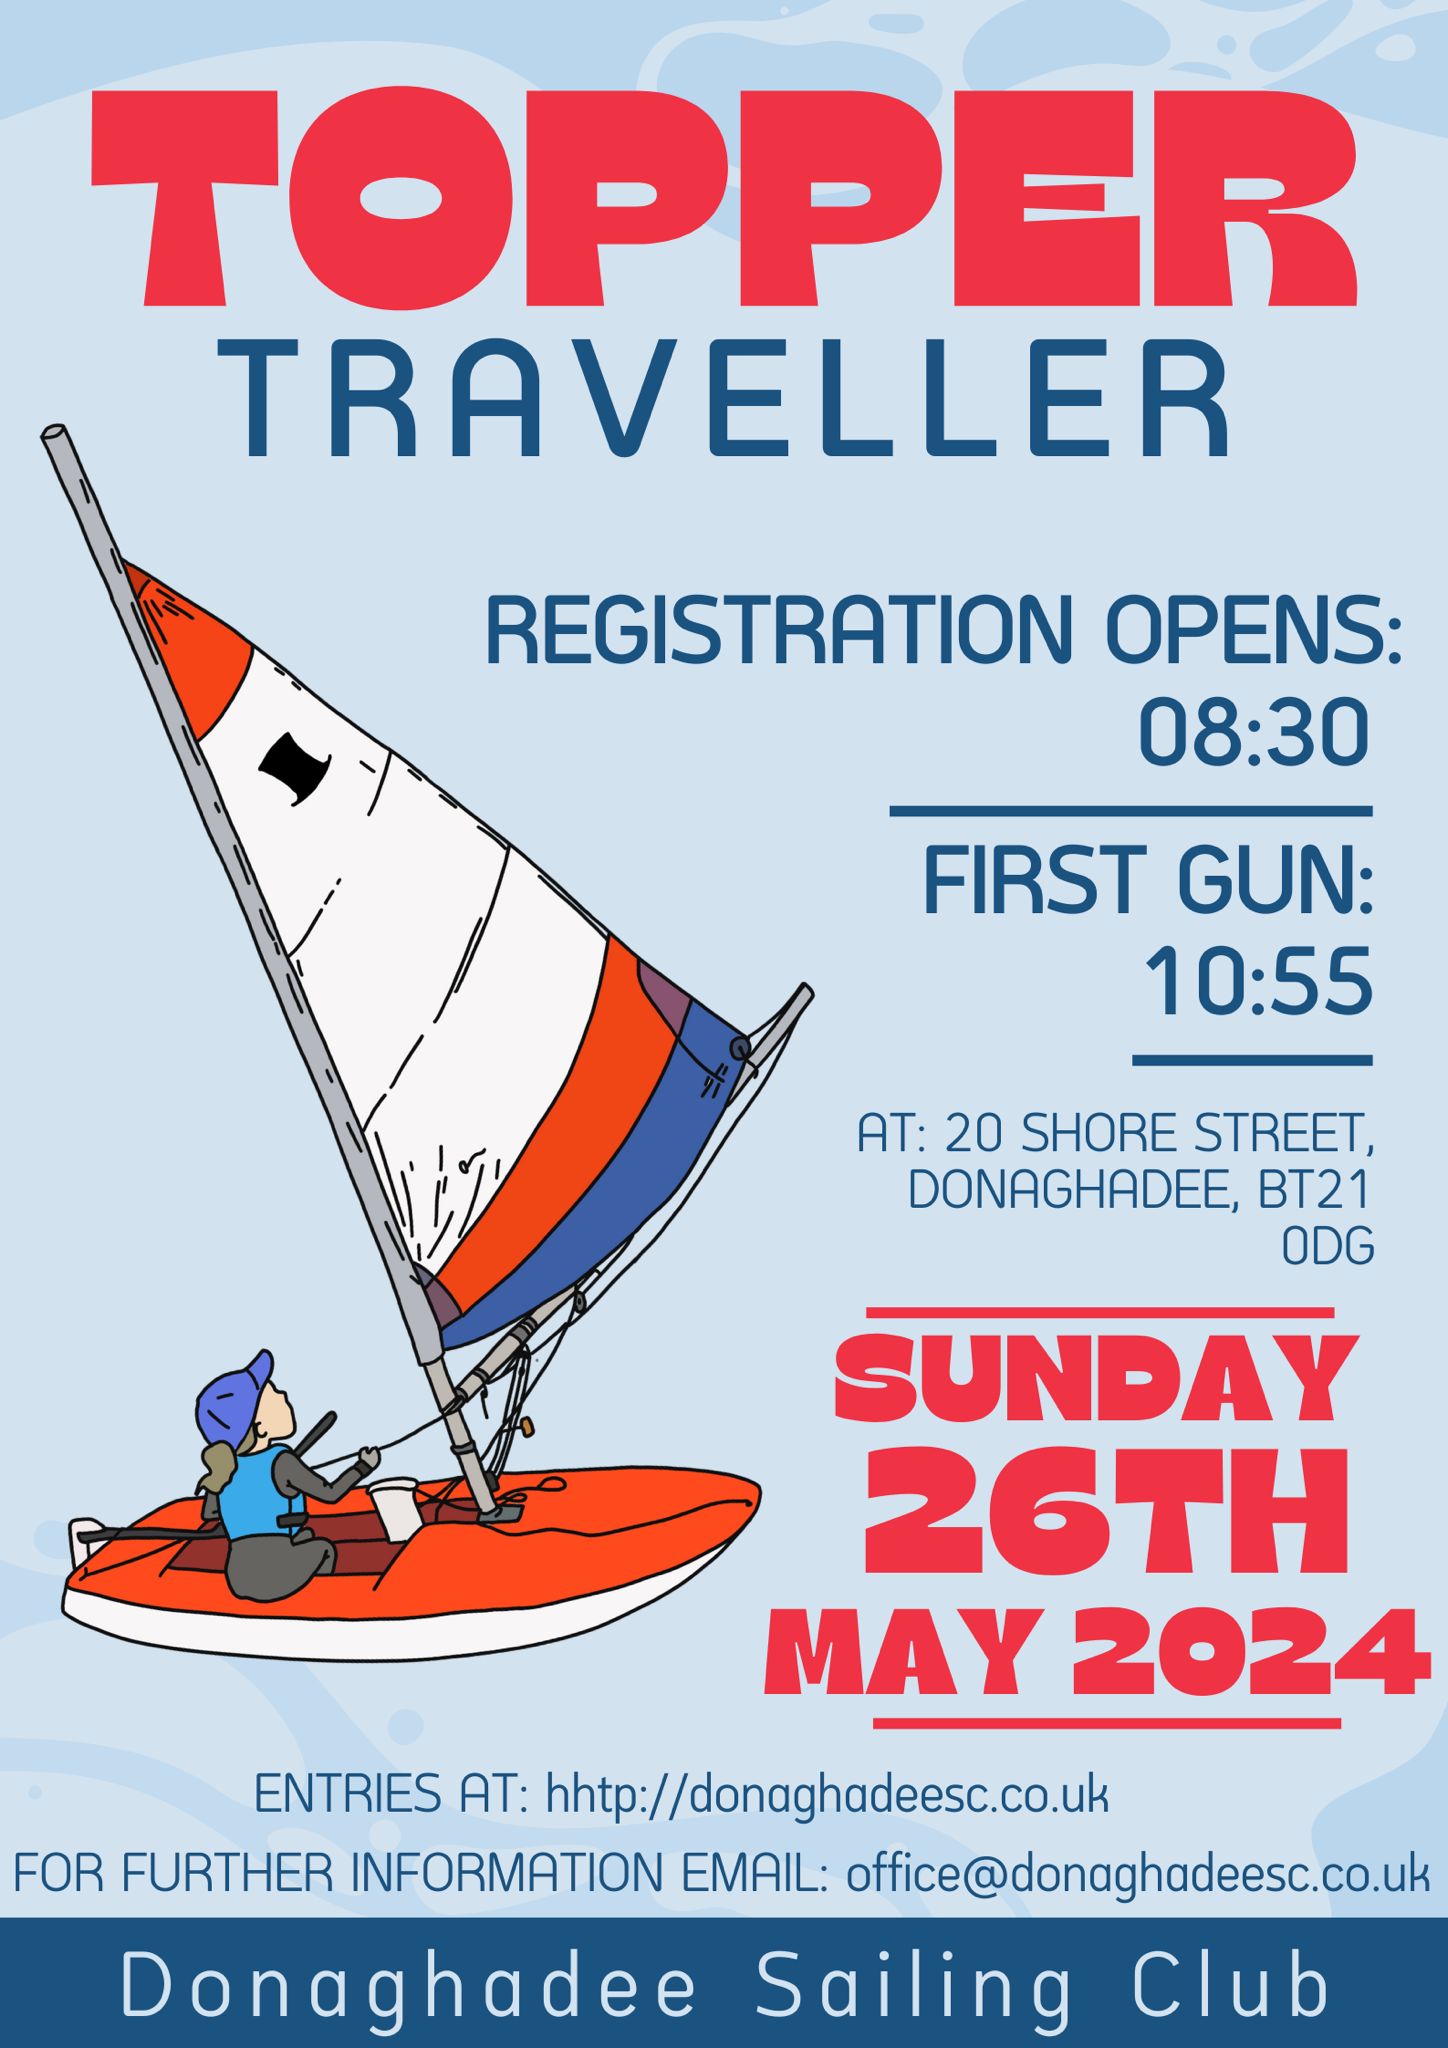 ITCA Topper Ireland Traveller 3 2024 - Entry closes 12 noon 20th May!